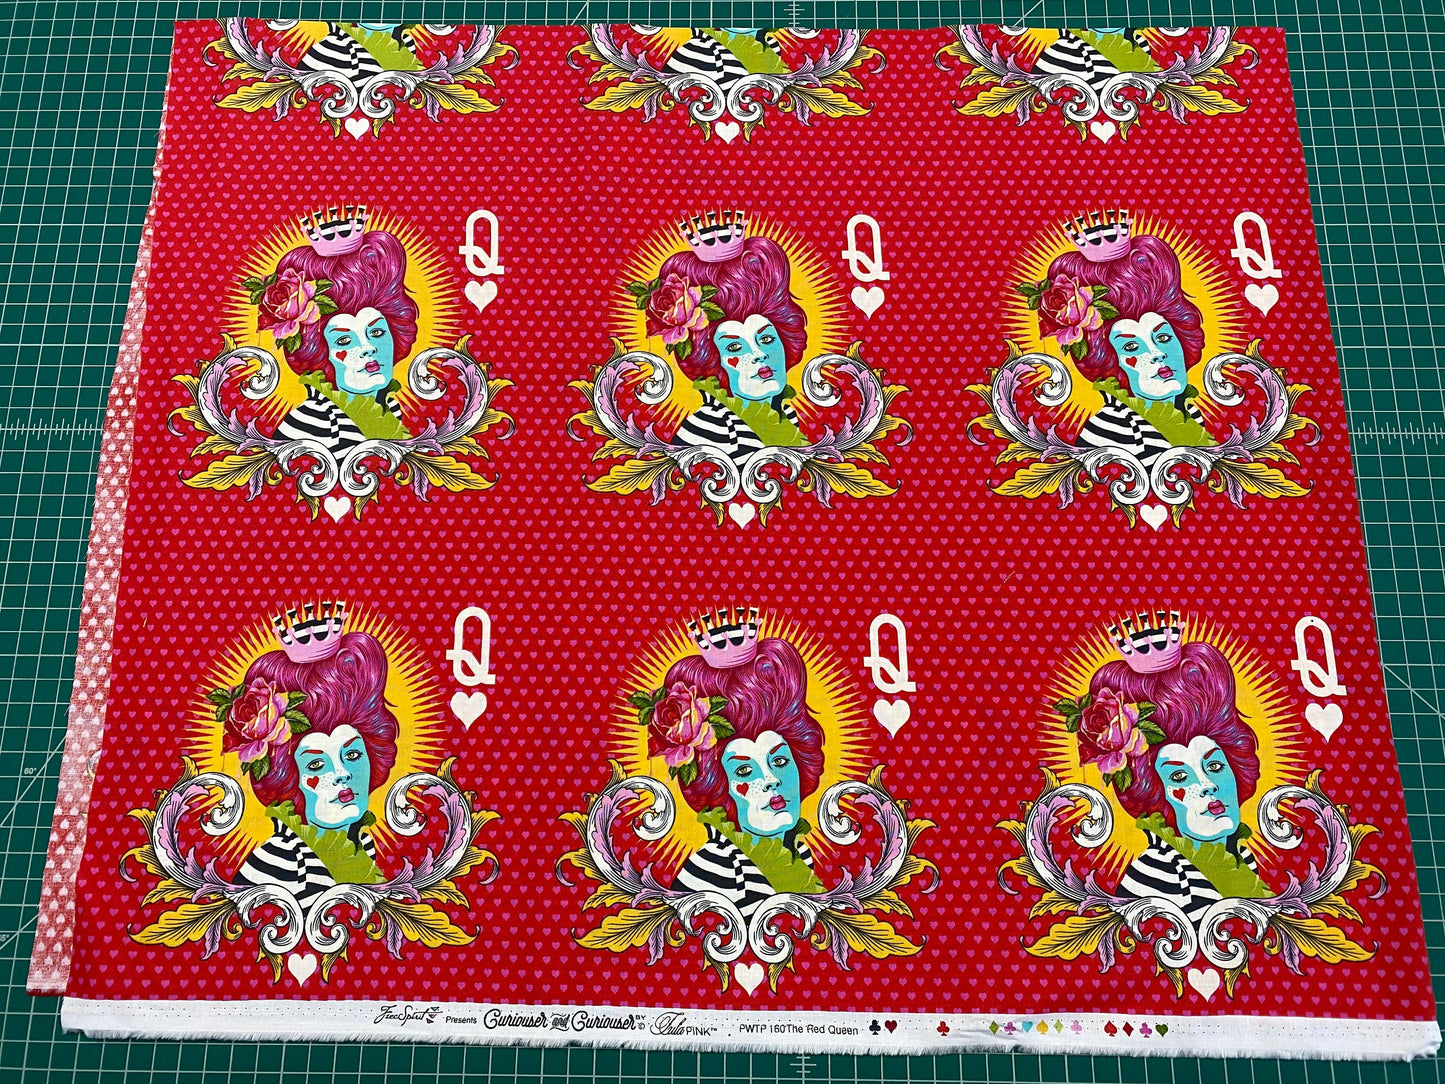 Tula Pink Curiouser & Curiouser The Red Queen Wonder PWTP160.WONDER Cotton Woven Fabric Sold as 26" Panel of 3 Rows